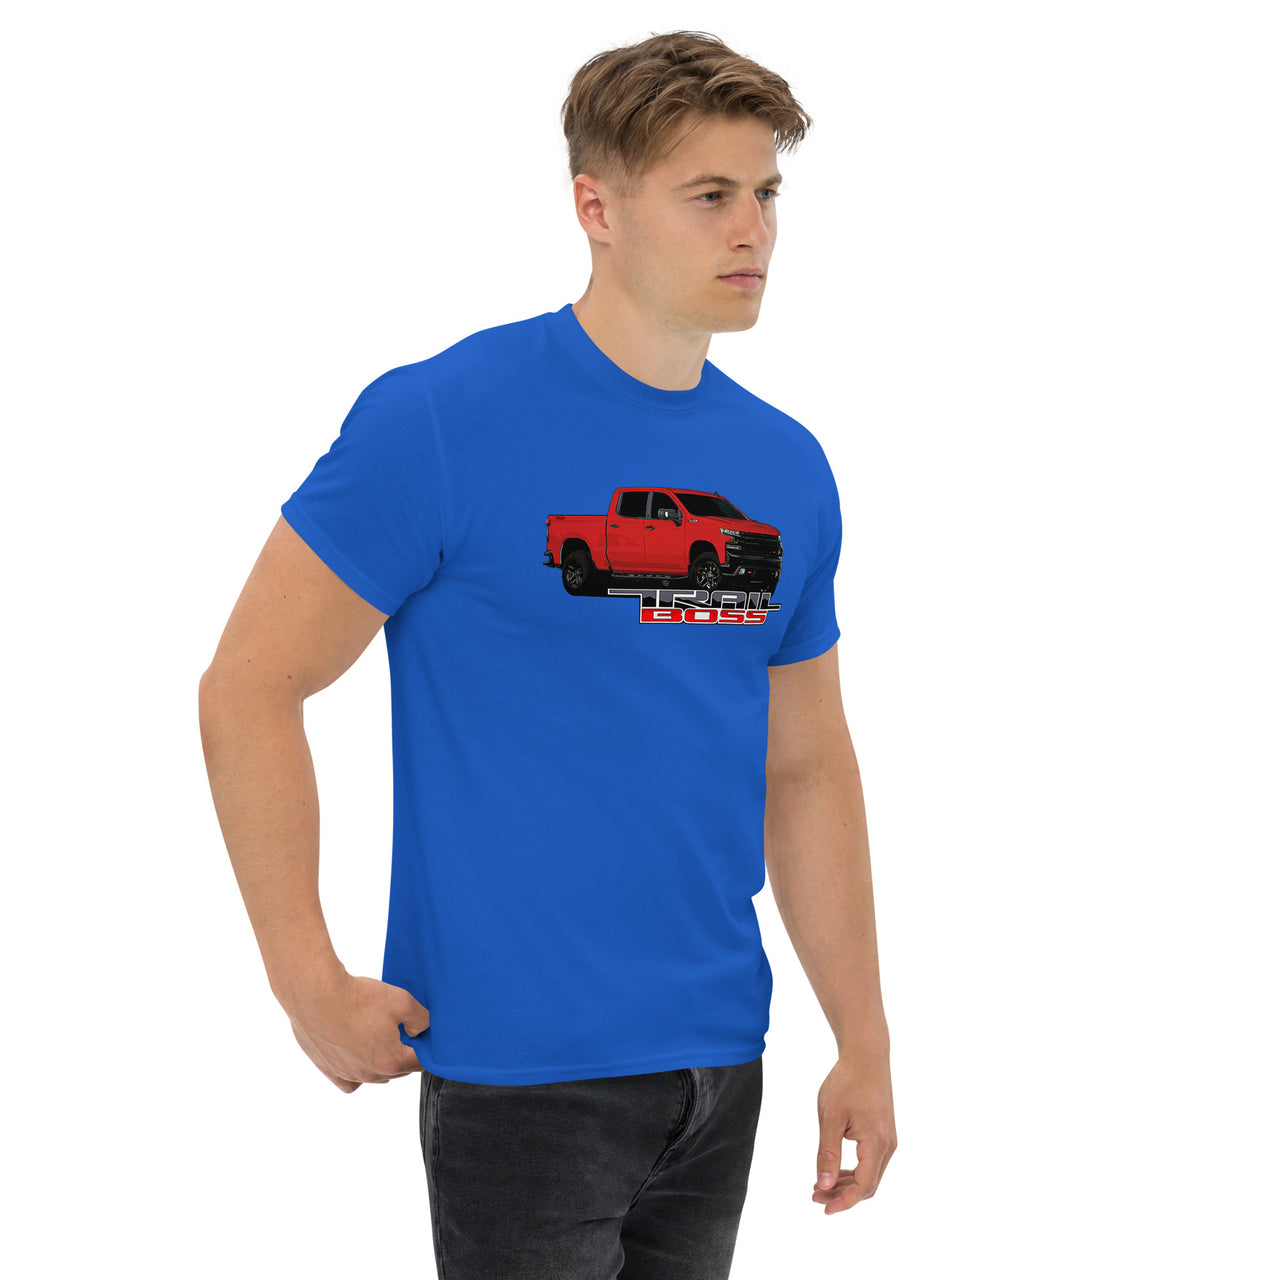 Red Trail Boss Truck T-Shirt modeled in royal